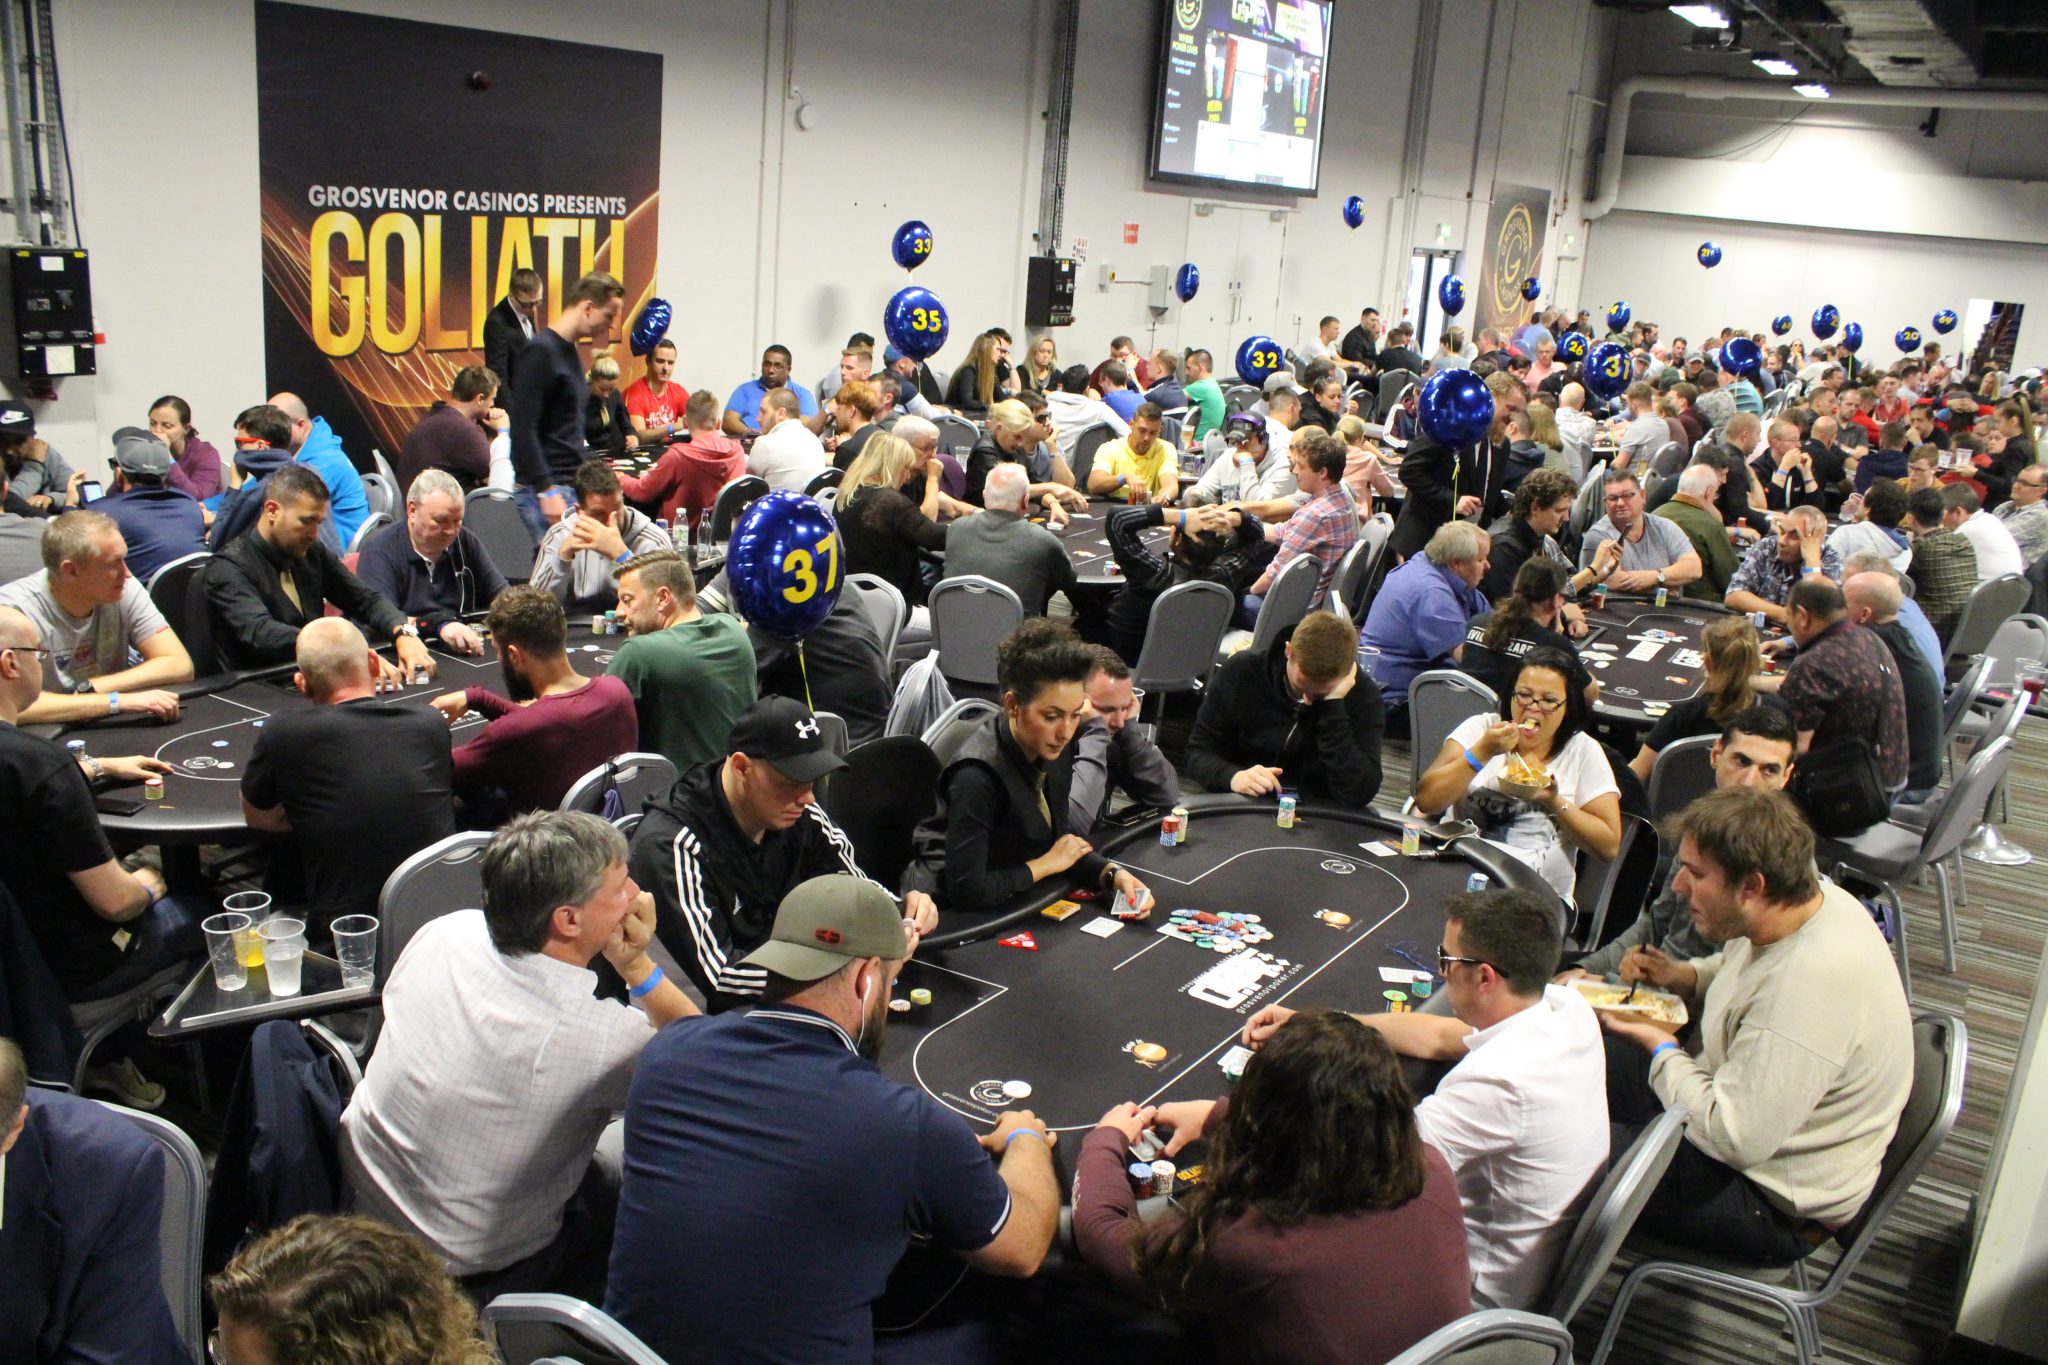 2018 GUKPT Goliath Keeping Pace with WSOP Main Event Massiveness